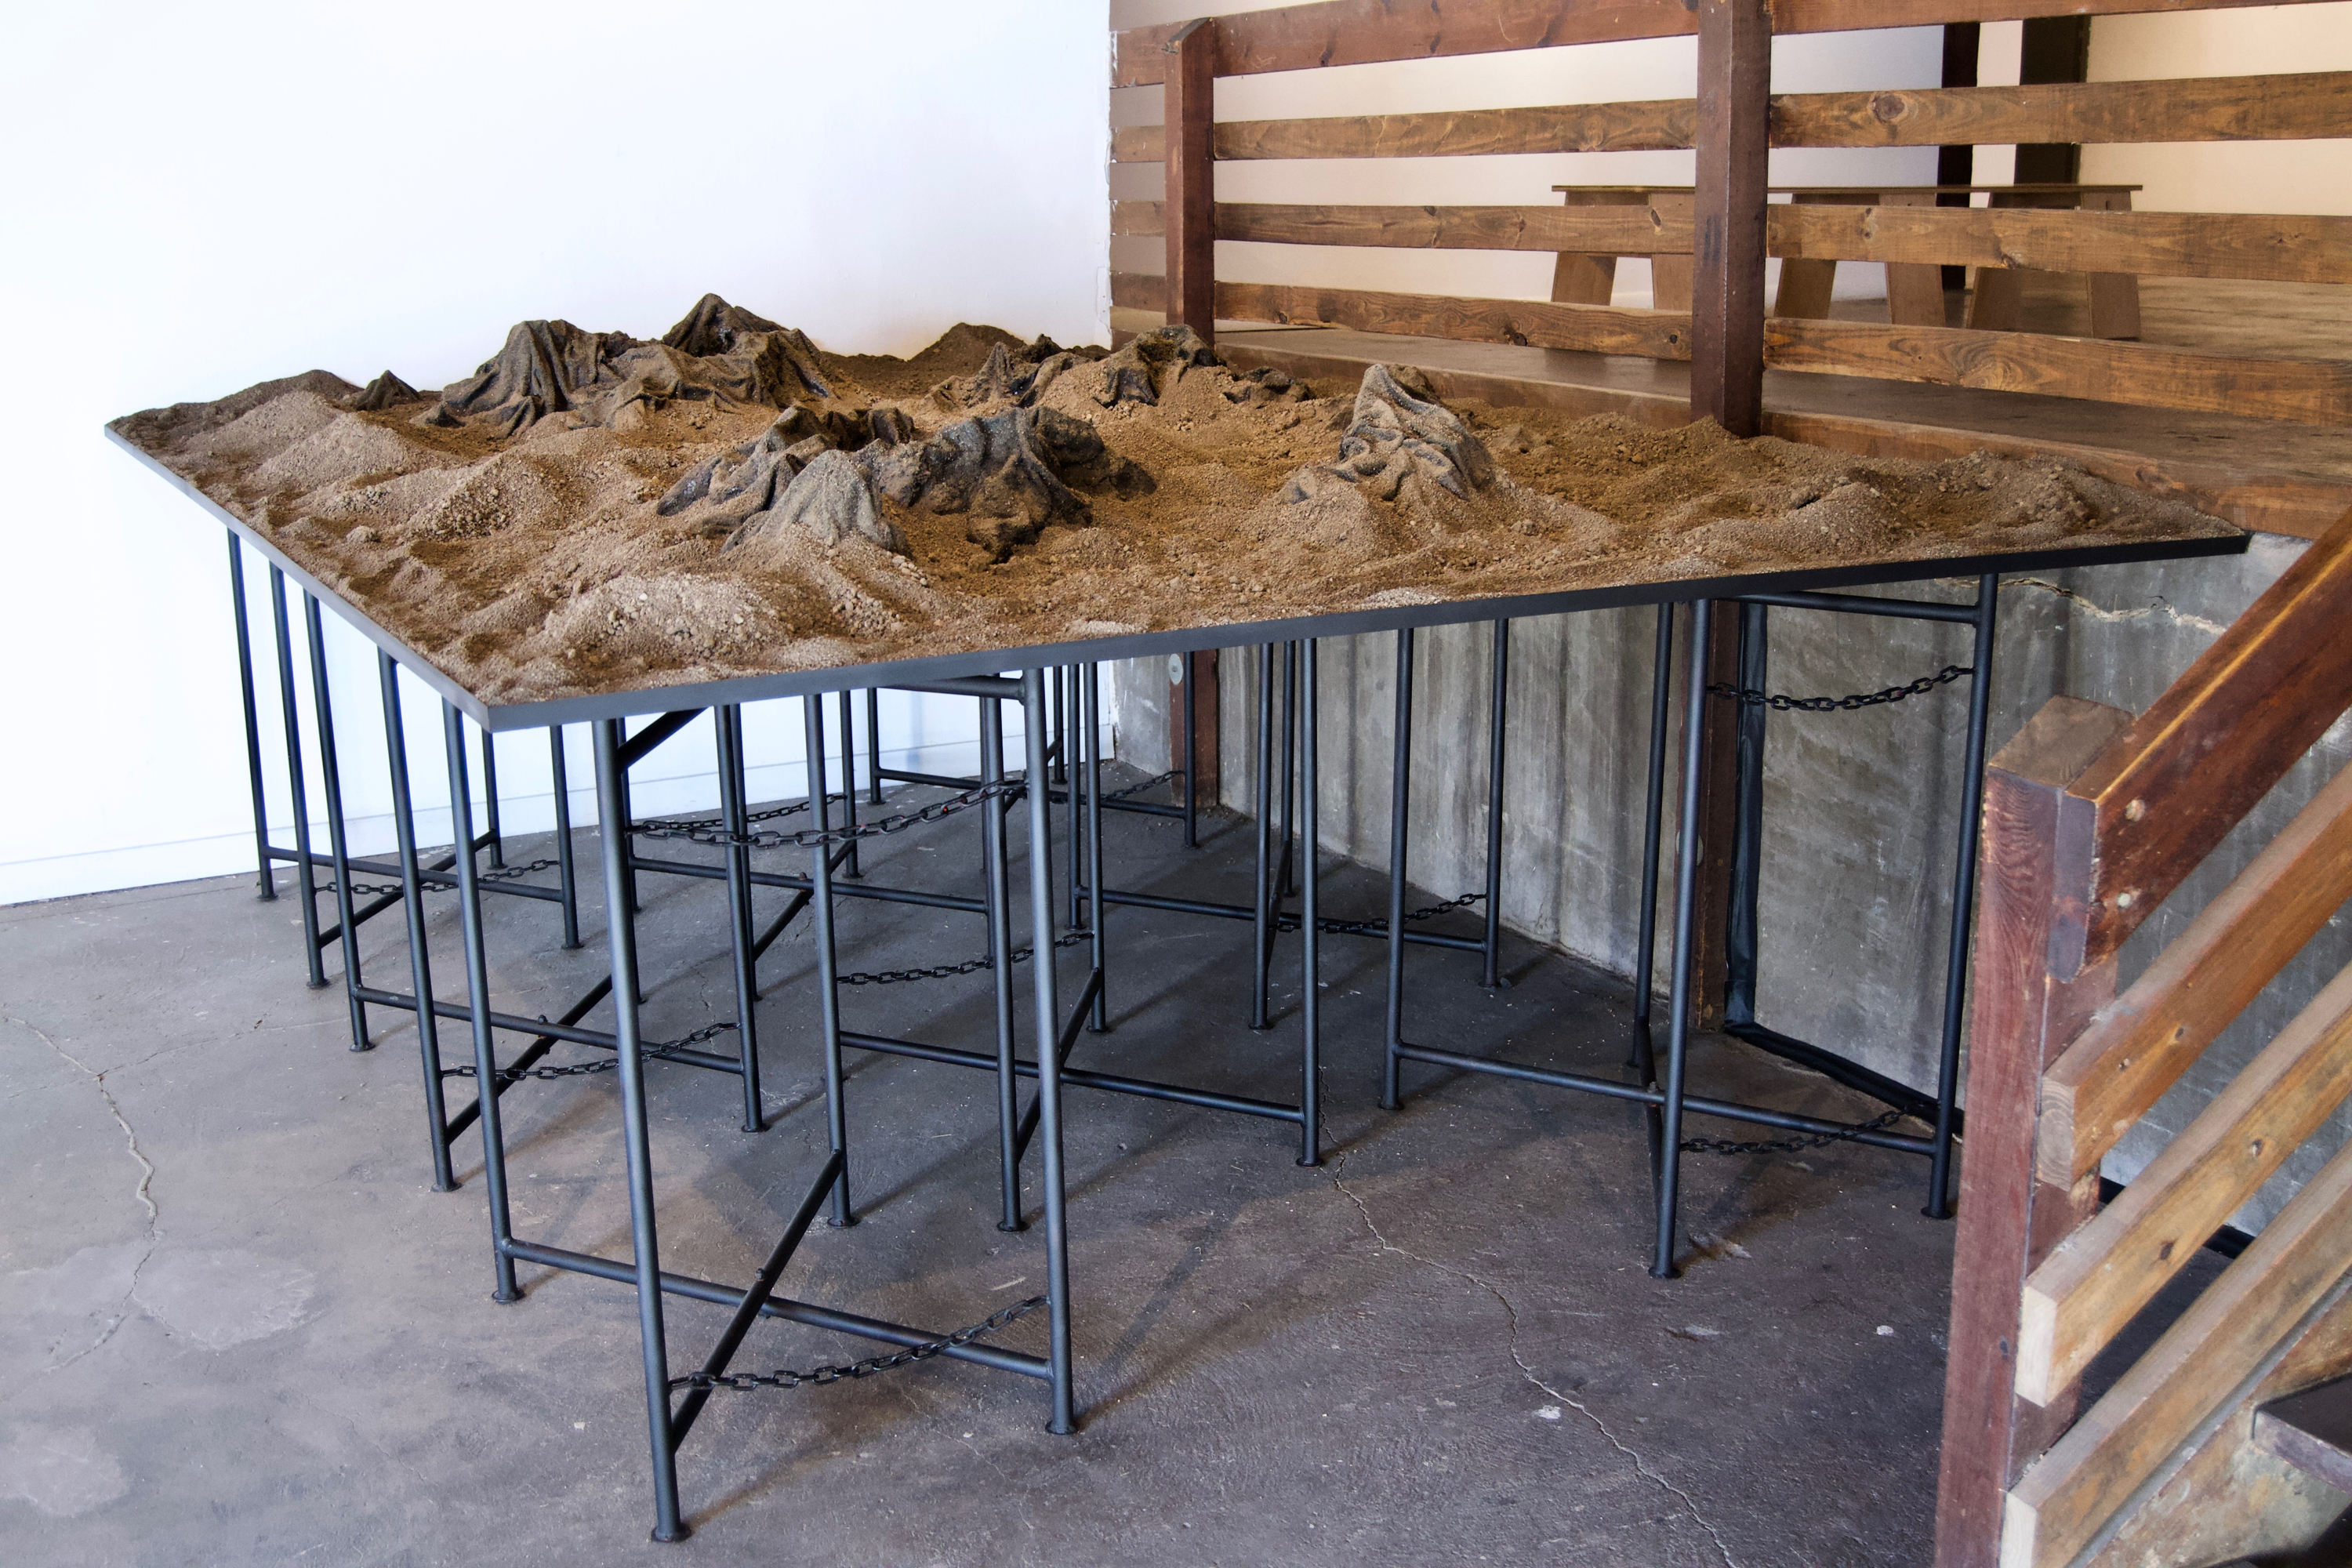 Caroline Hatfield, Land and Water, 2019, 45" x 144" x 96”, mortar stands, plywood, crushed recycled concrete, resin bonded concrete, aluminum, water, water pumps